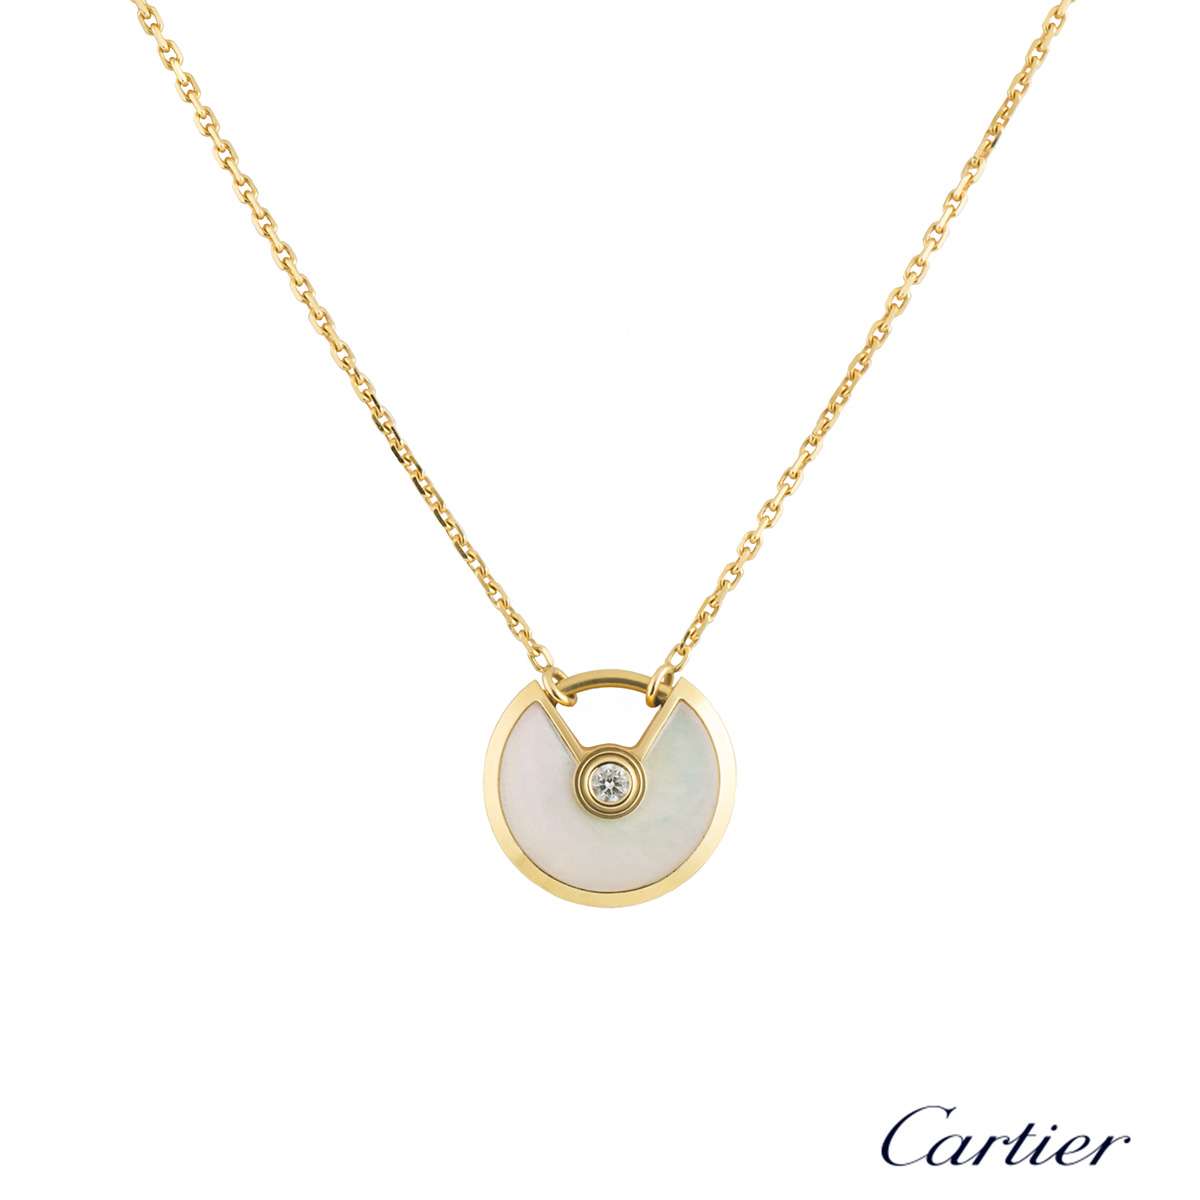 cartier dainty necklace